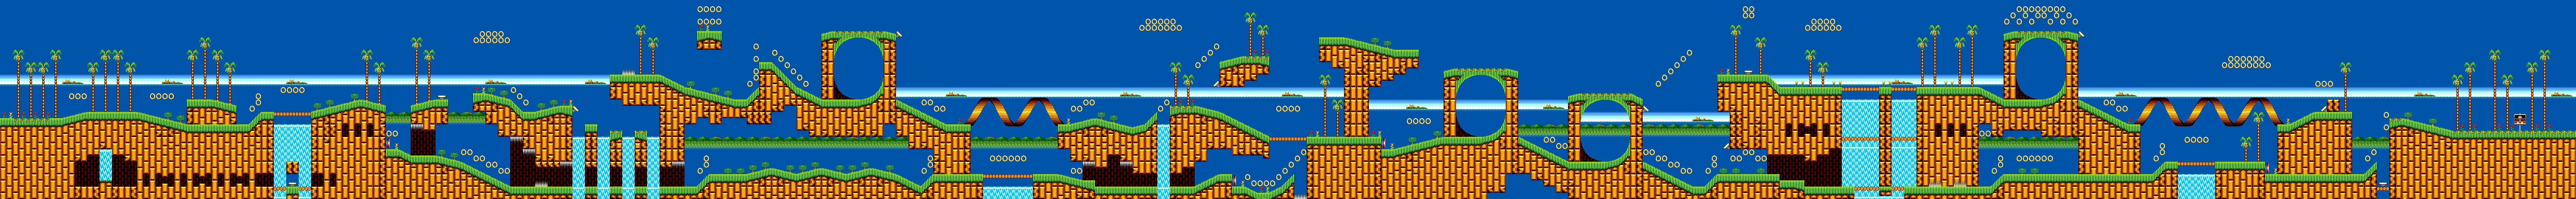 Sonic 2 LD (Hack) - Emerald Hill Zone Act 1